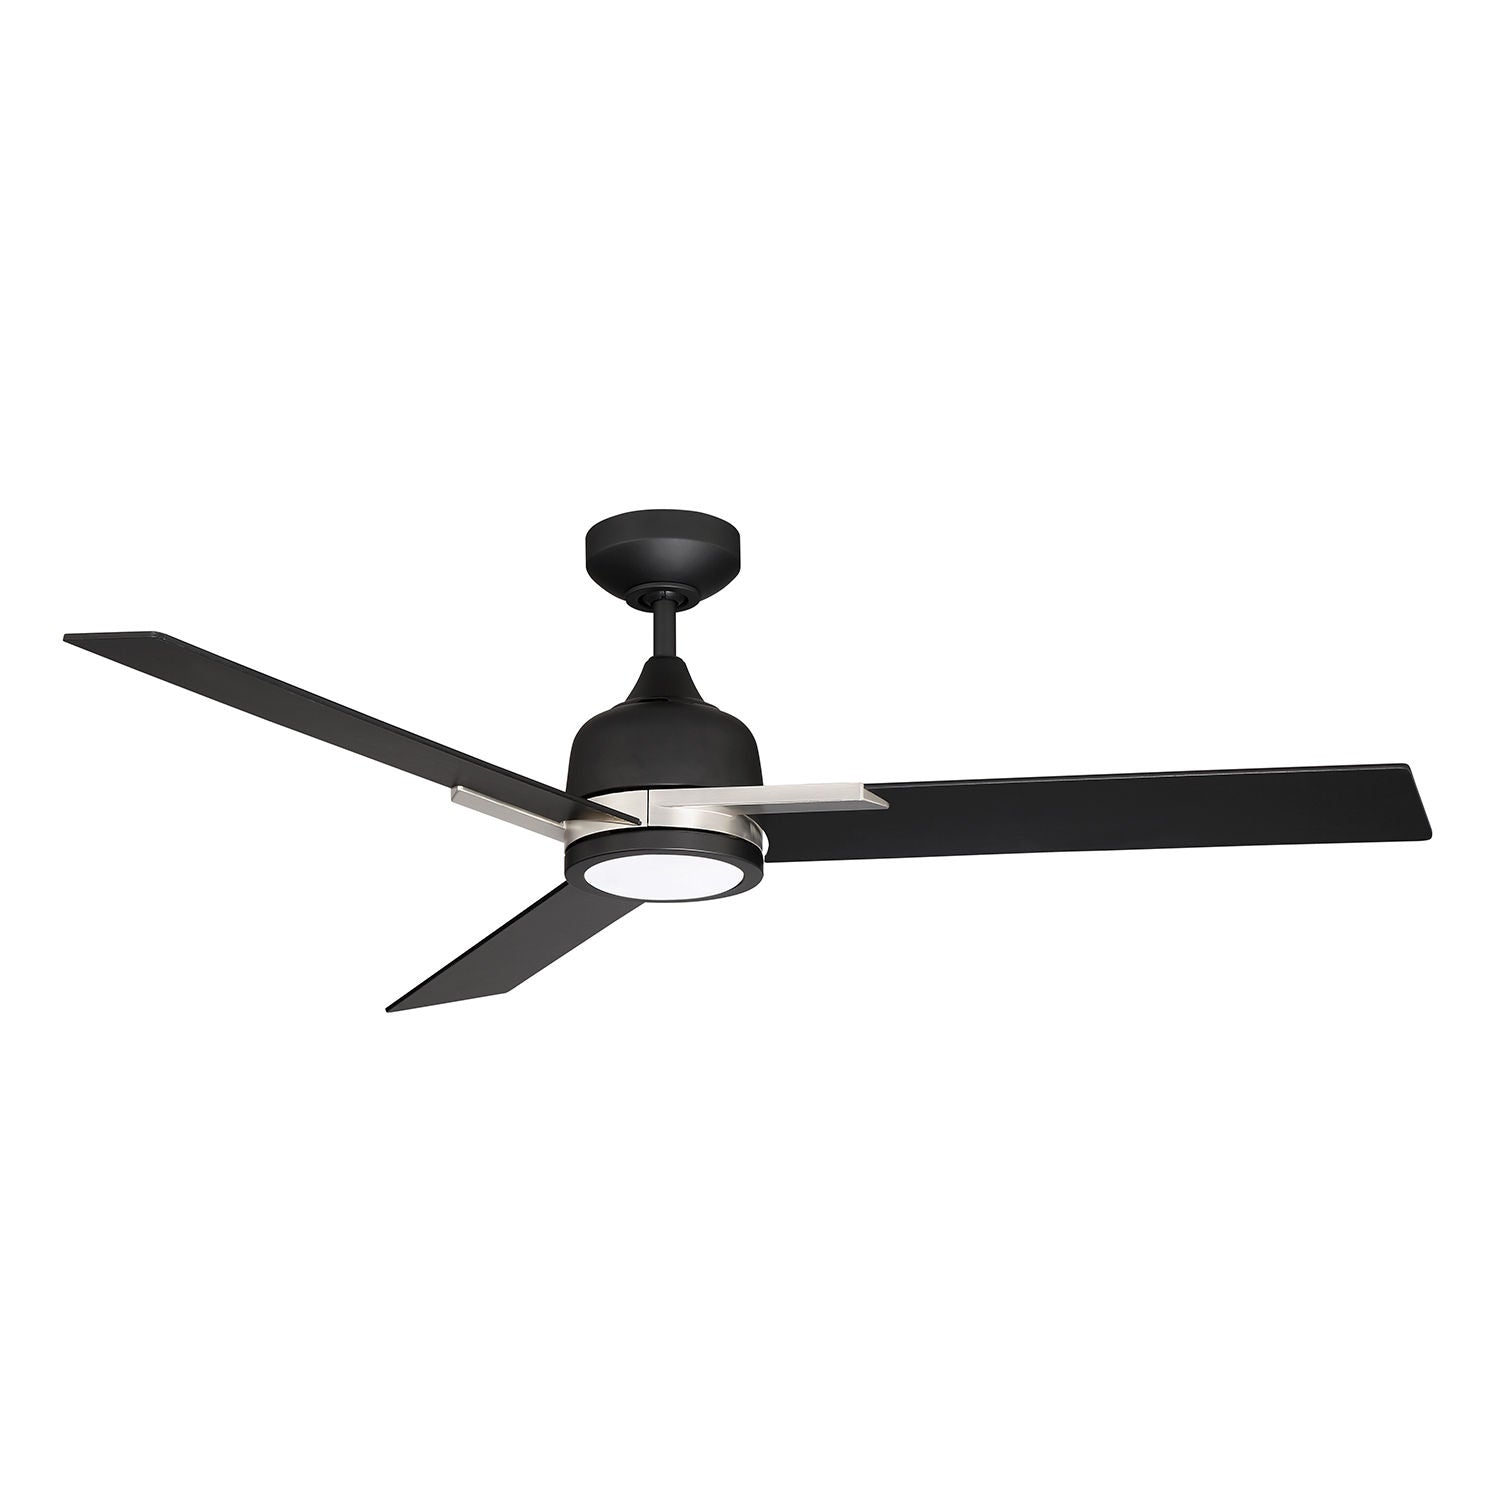 TRITON Ceiling fan Stainless steel, Black INTEGRATED LED - AC22452-BLK/SN | KENDAL